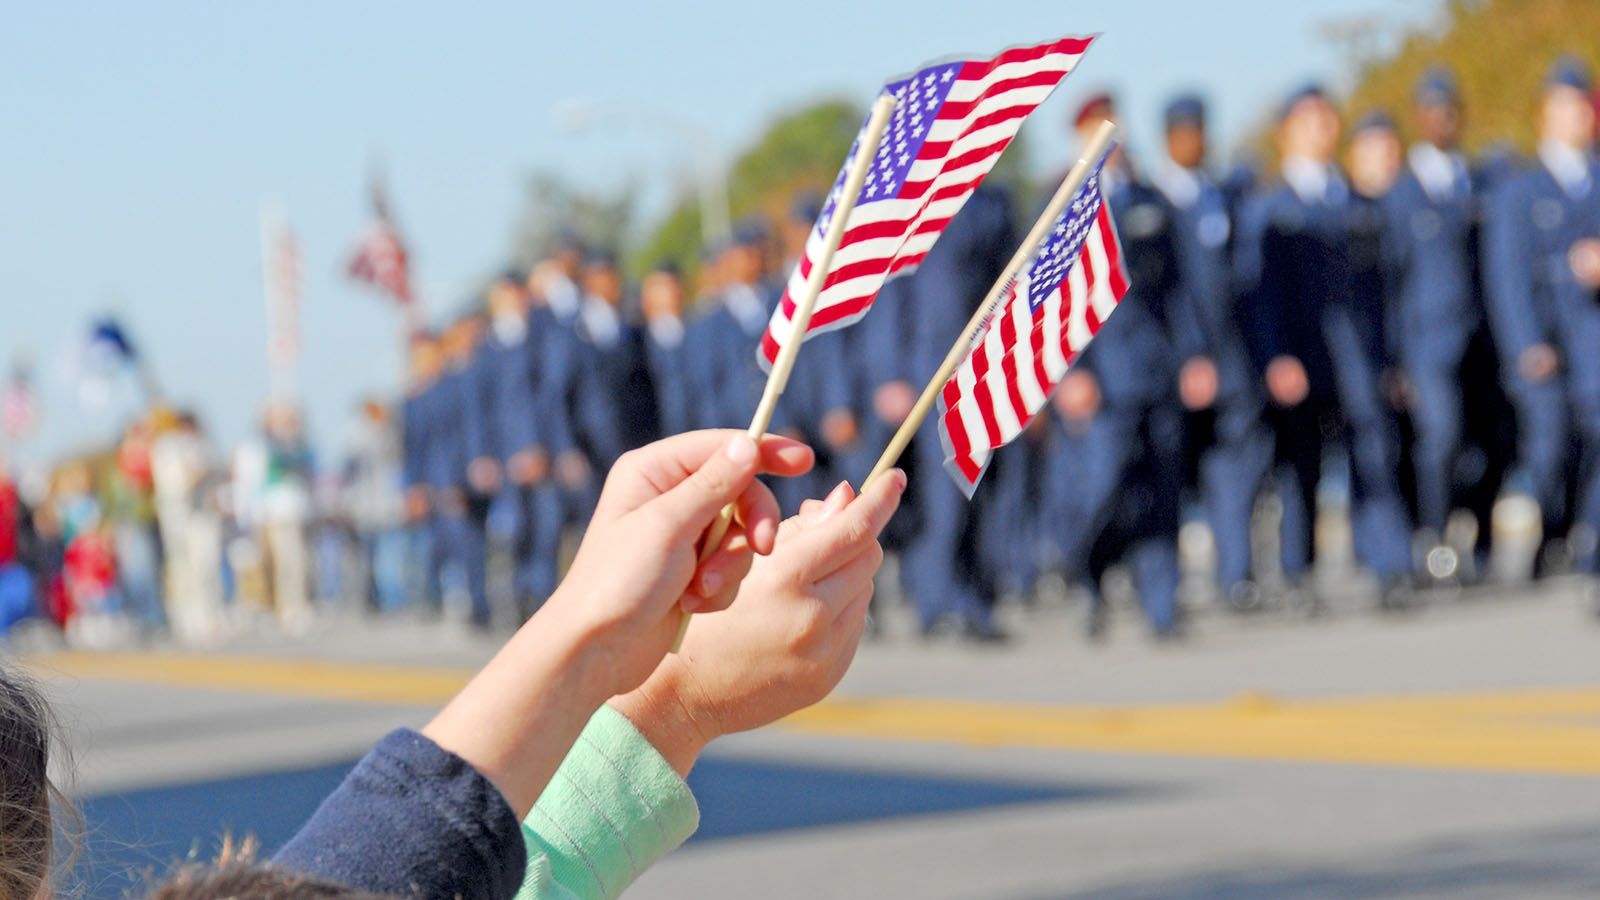 Waynedale and Fort Wayne will have parades to mark Memorial Day on Monday, May 27.